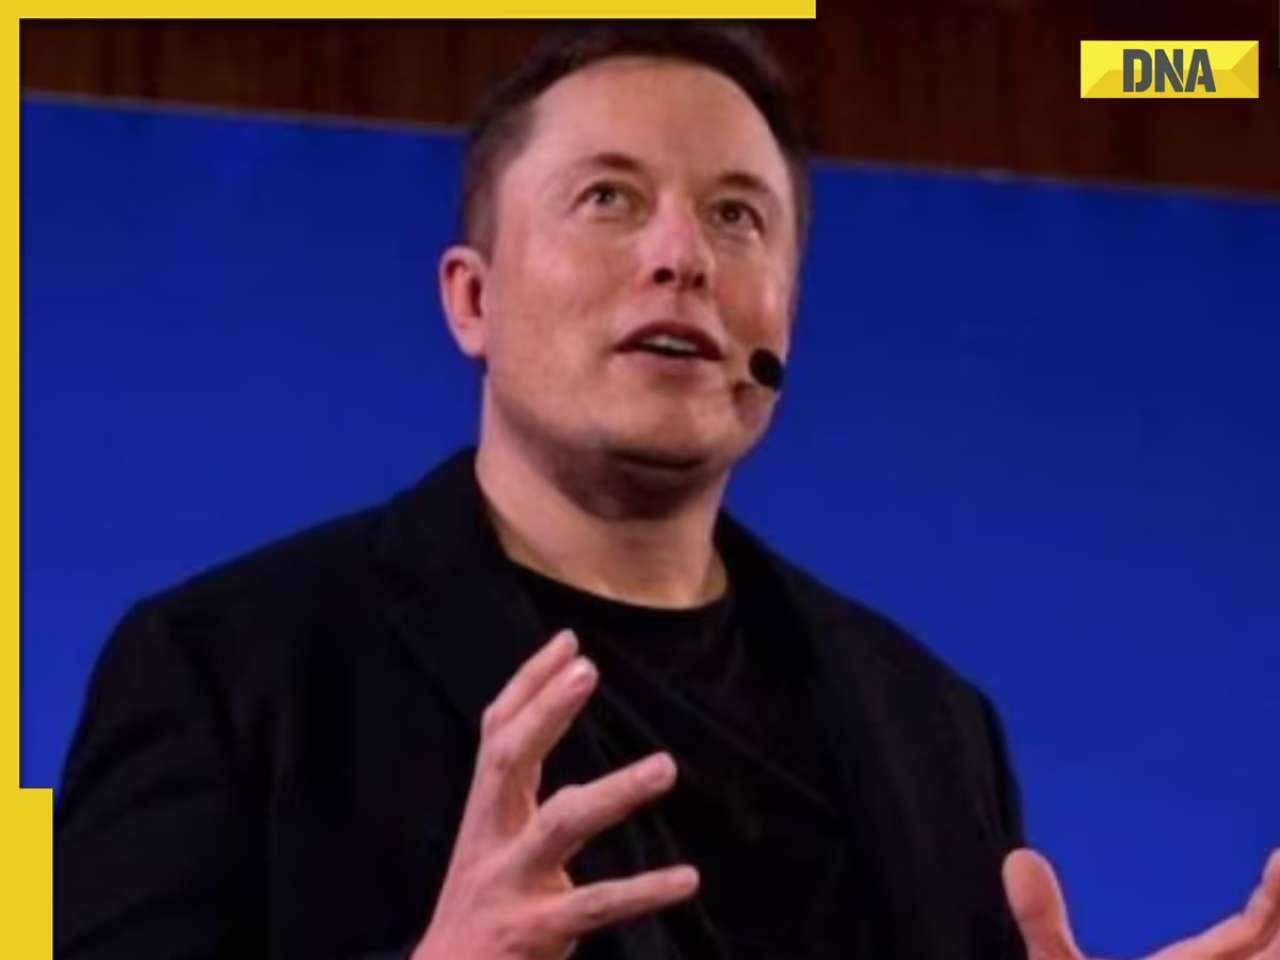 'What matters is...': Tesla CEO Elon Musk opens up on drug use, reveals why he takes ketamine